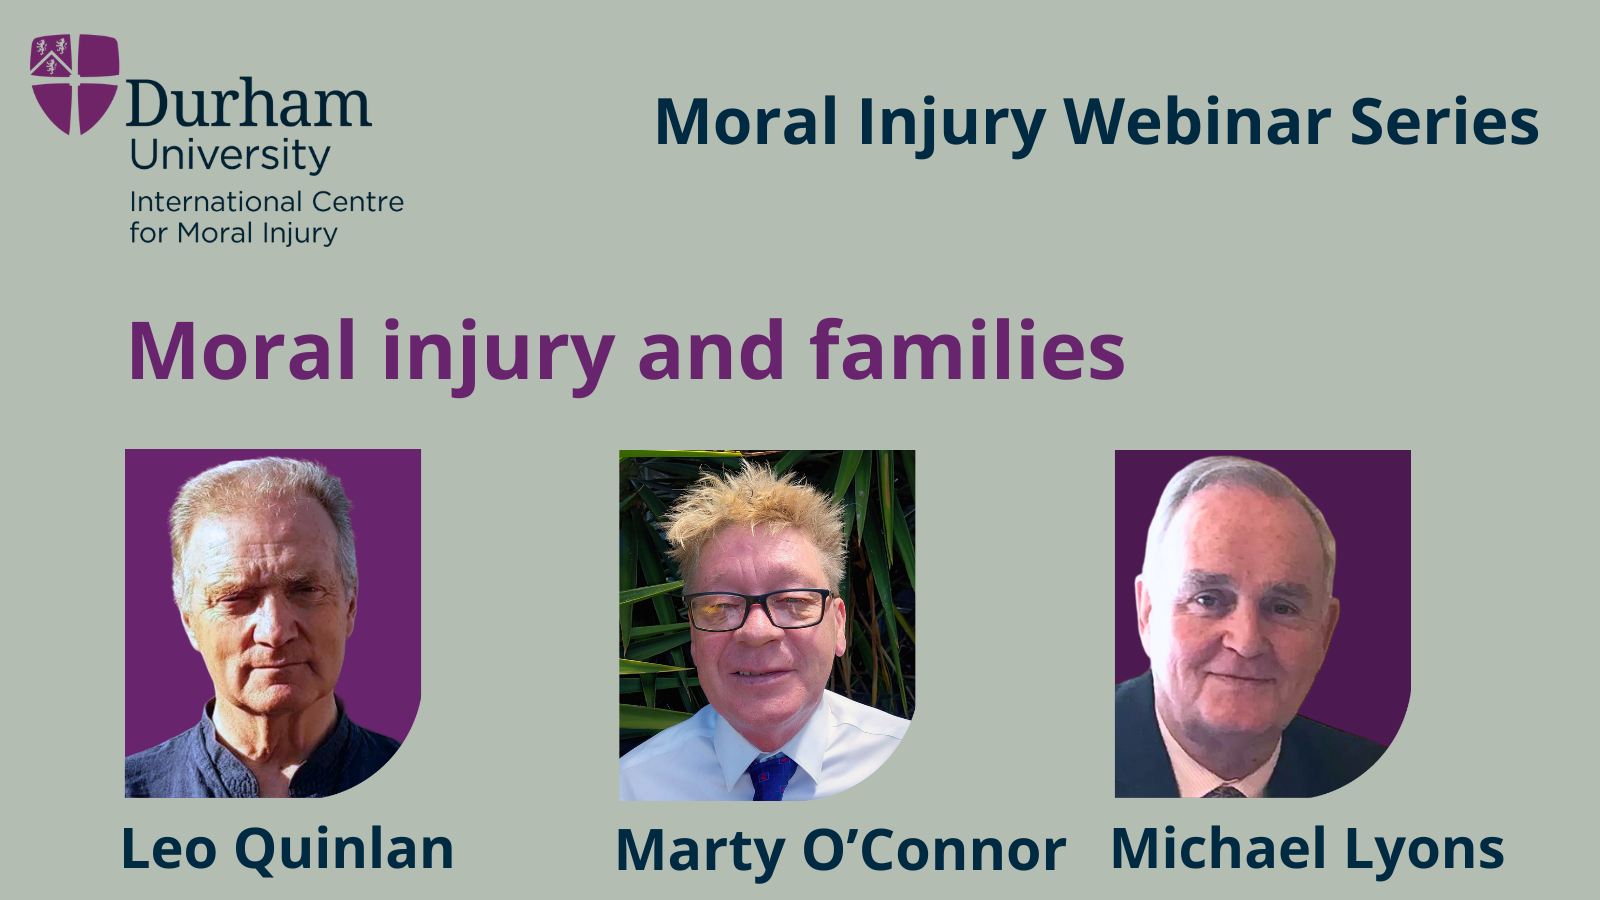 Moral injury and families, by Leo Quinlan, Marty O'Connor and Michael Lyons